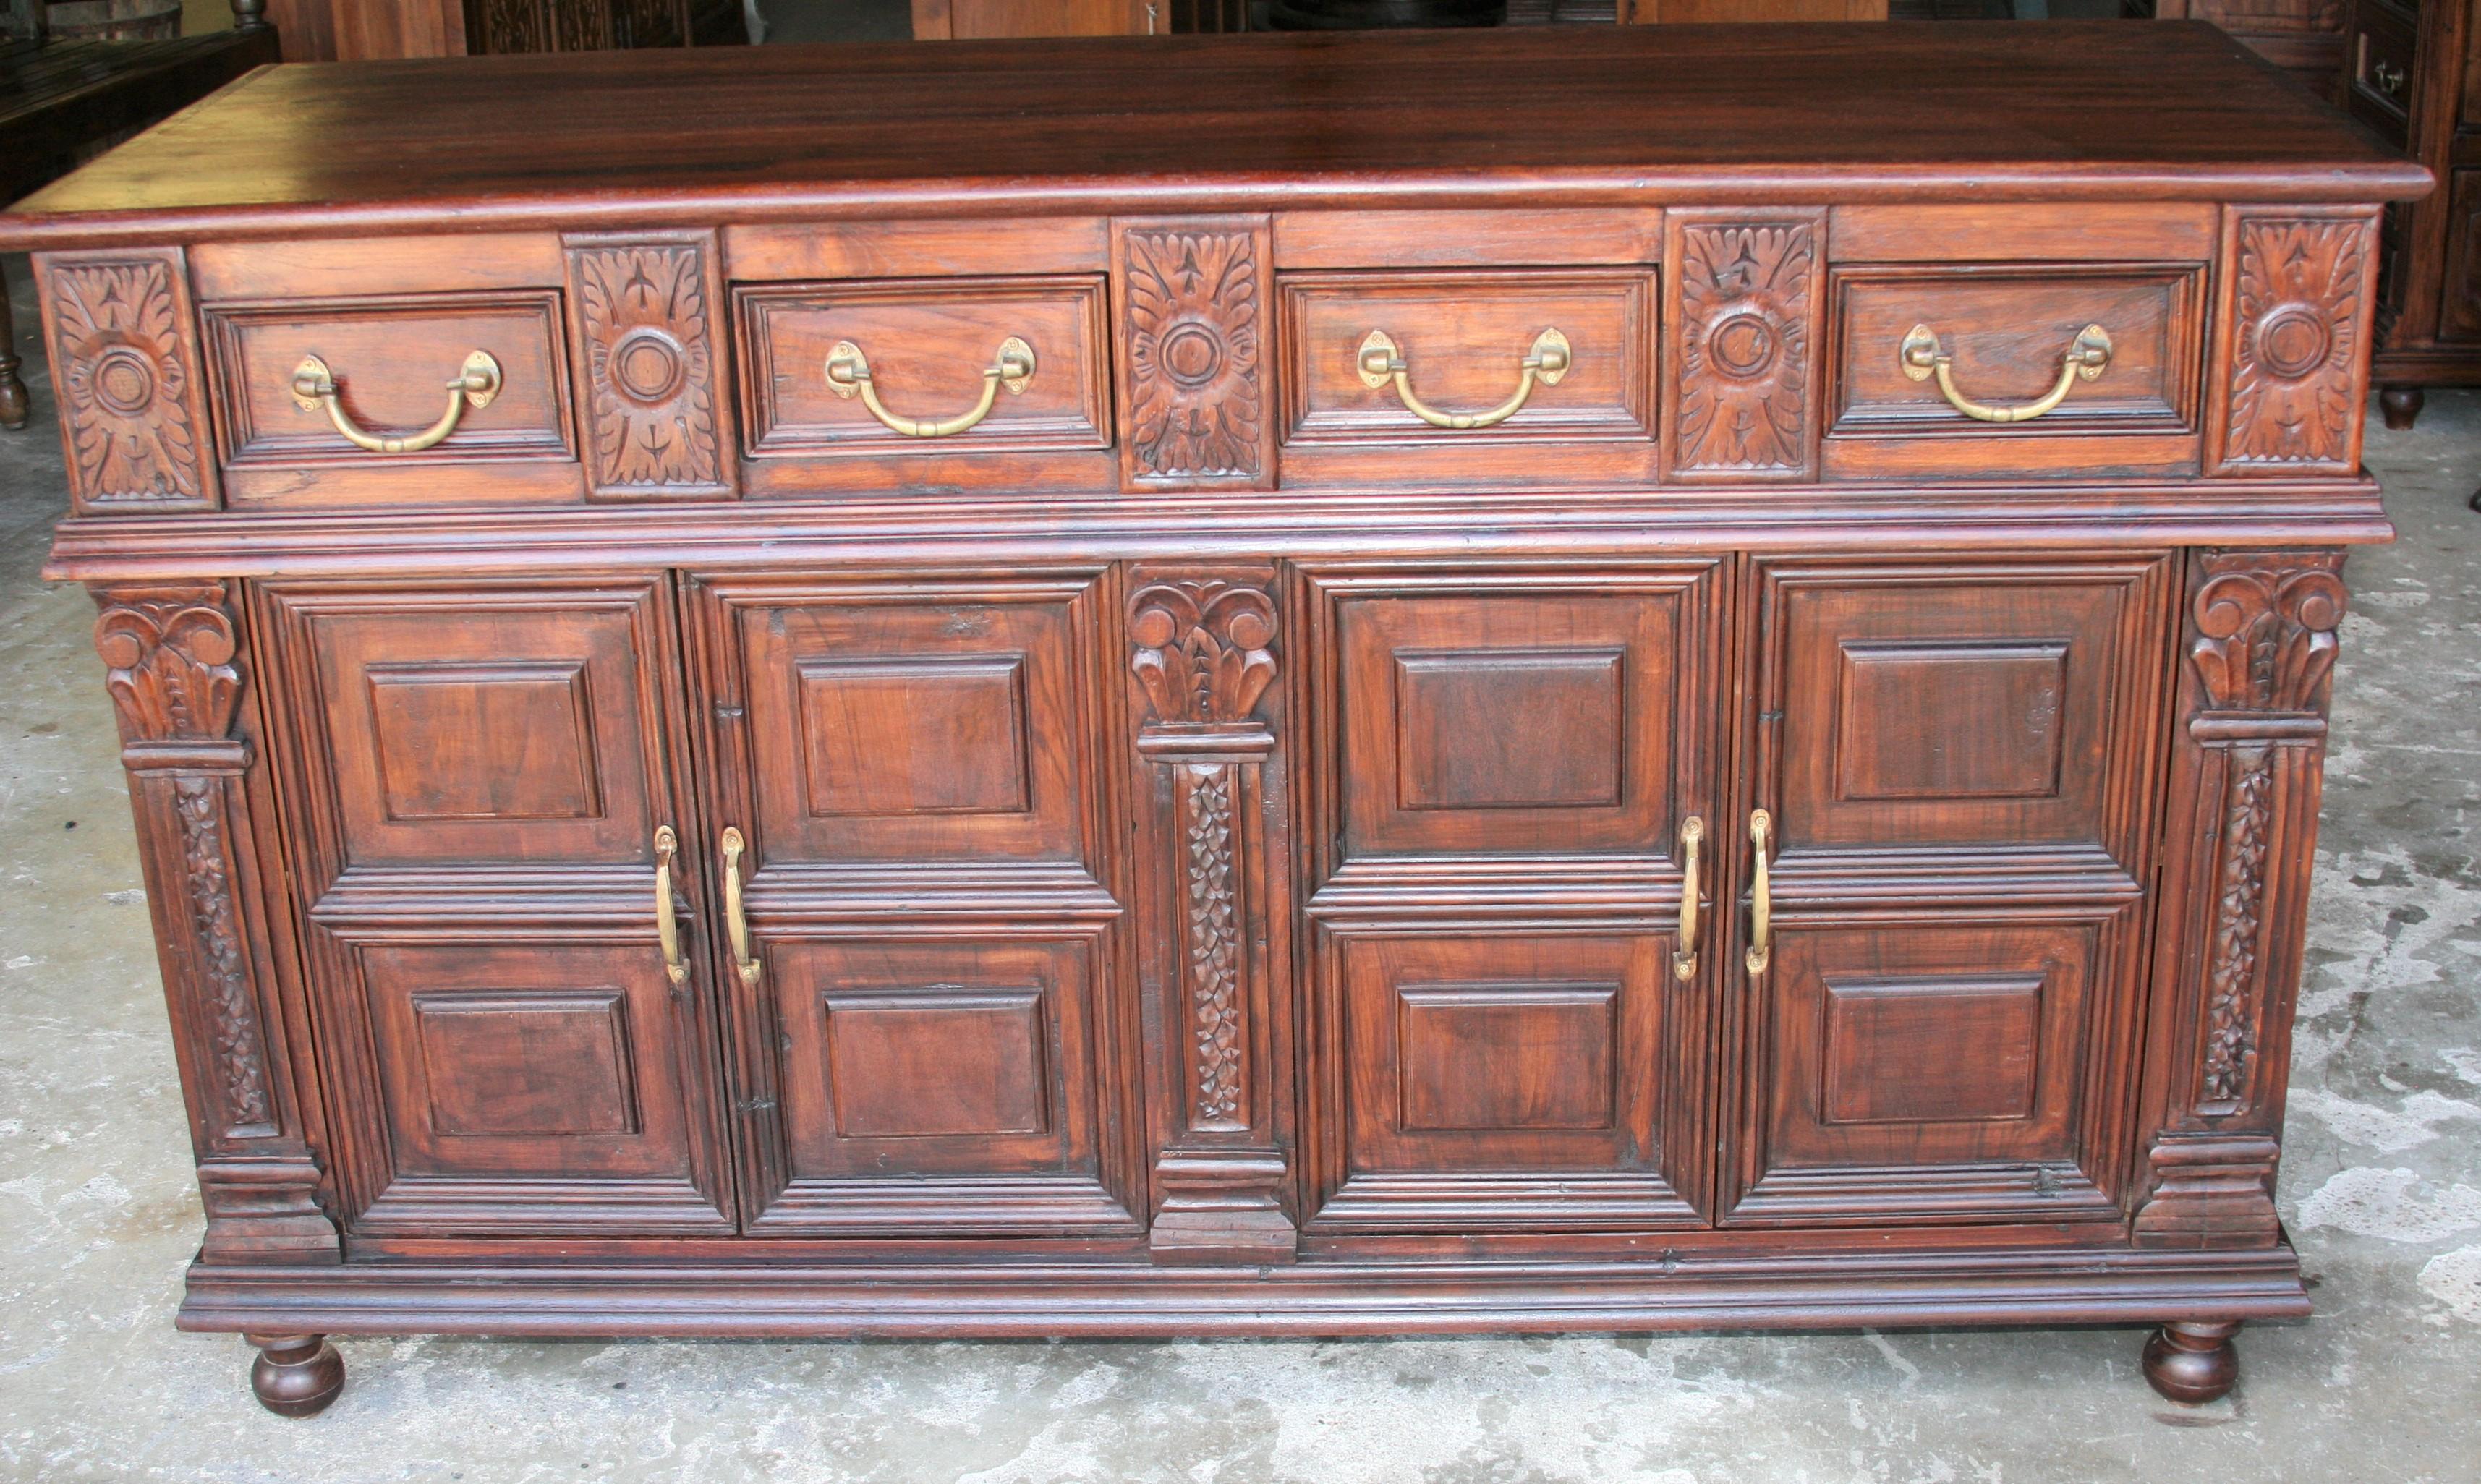 An unique custom made solid teak wood credenza from a French Colonial home in Asia. It has four upper drawers and two large bottom shelves. It is mounted on ball feet. It retains original hand cast brass hardware. It comes from a town Pondicherry in